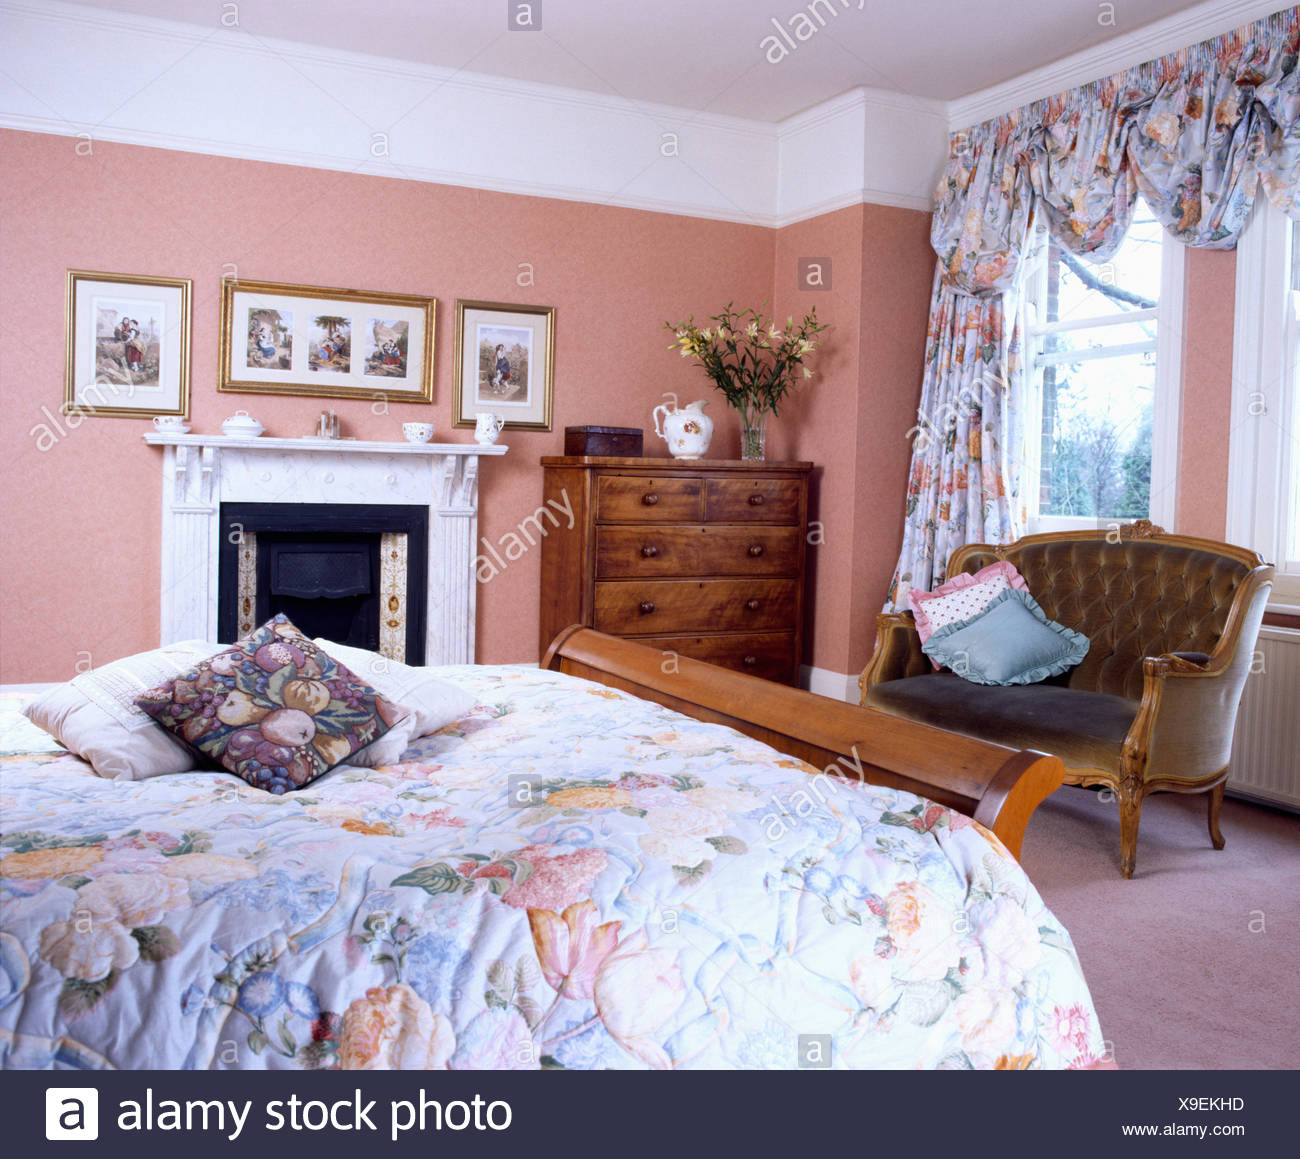 Peach Bedroom With Matching Floral Curtains And Quilt Stock